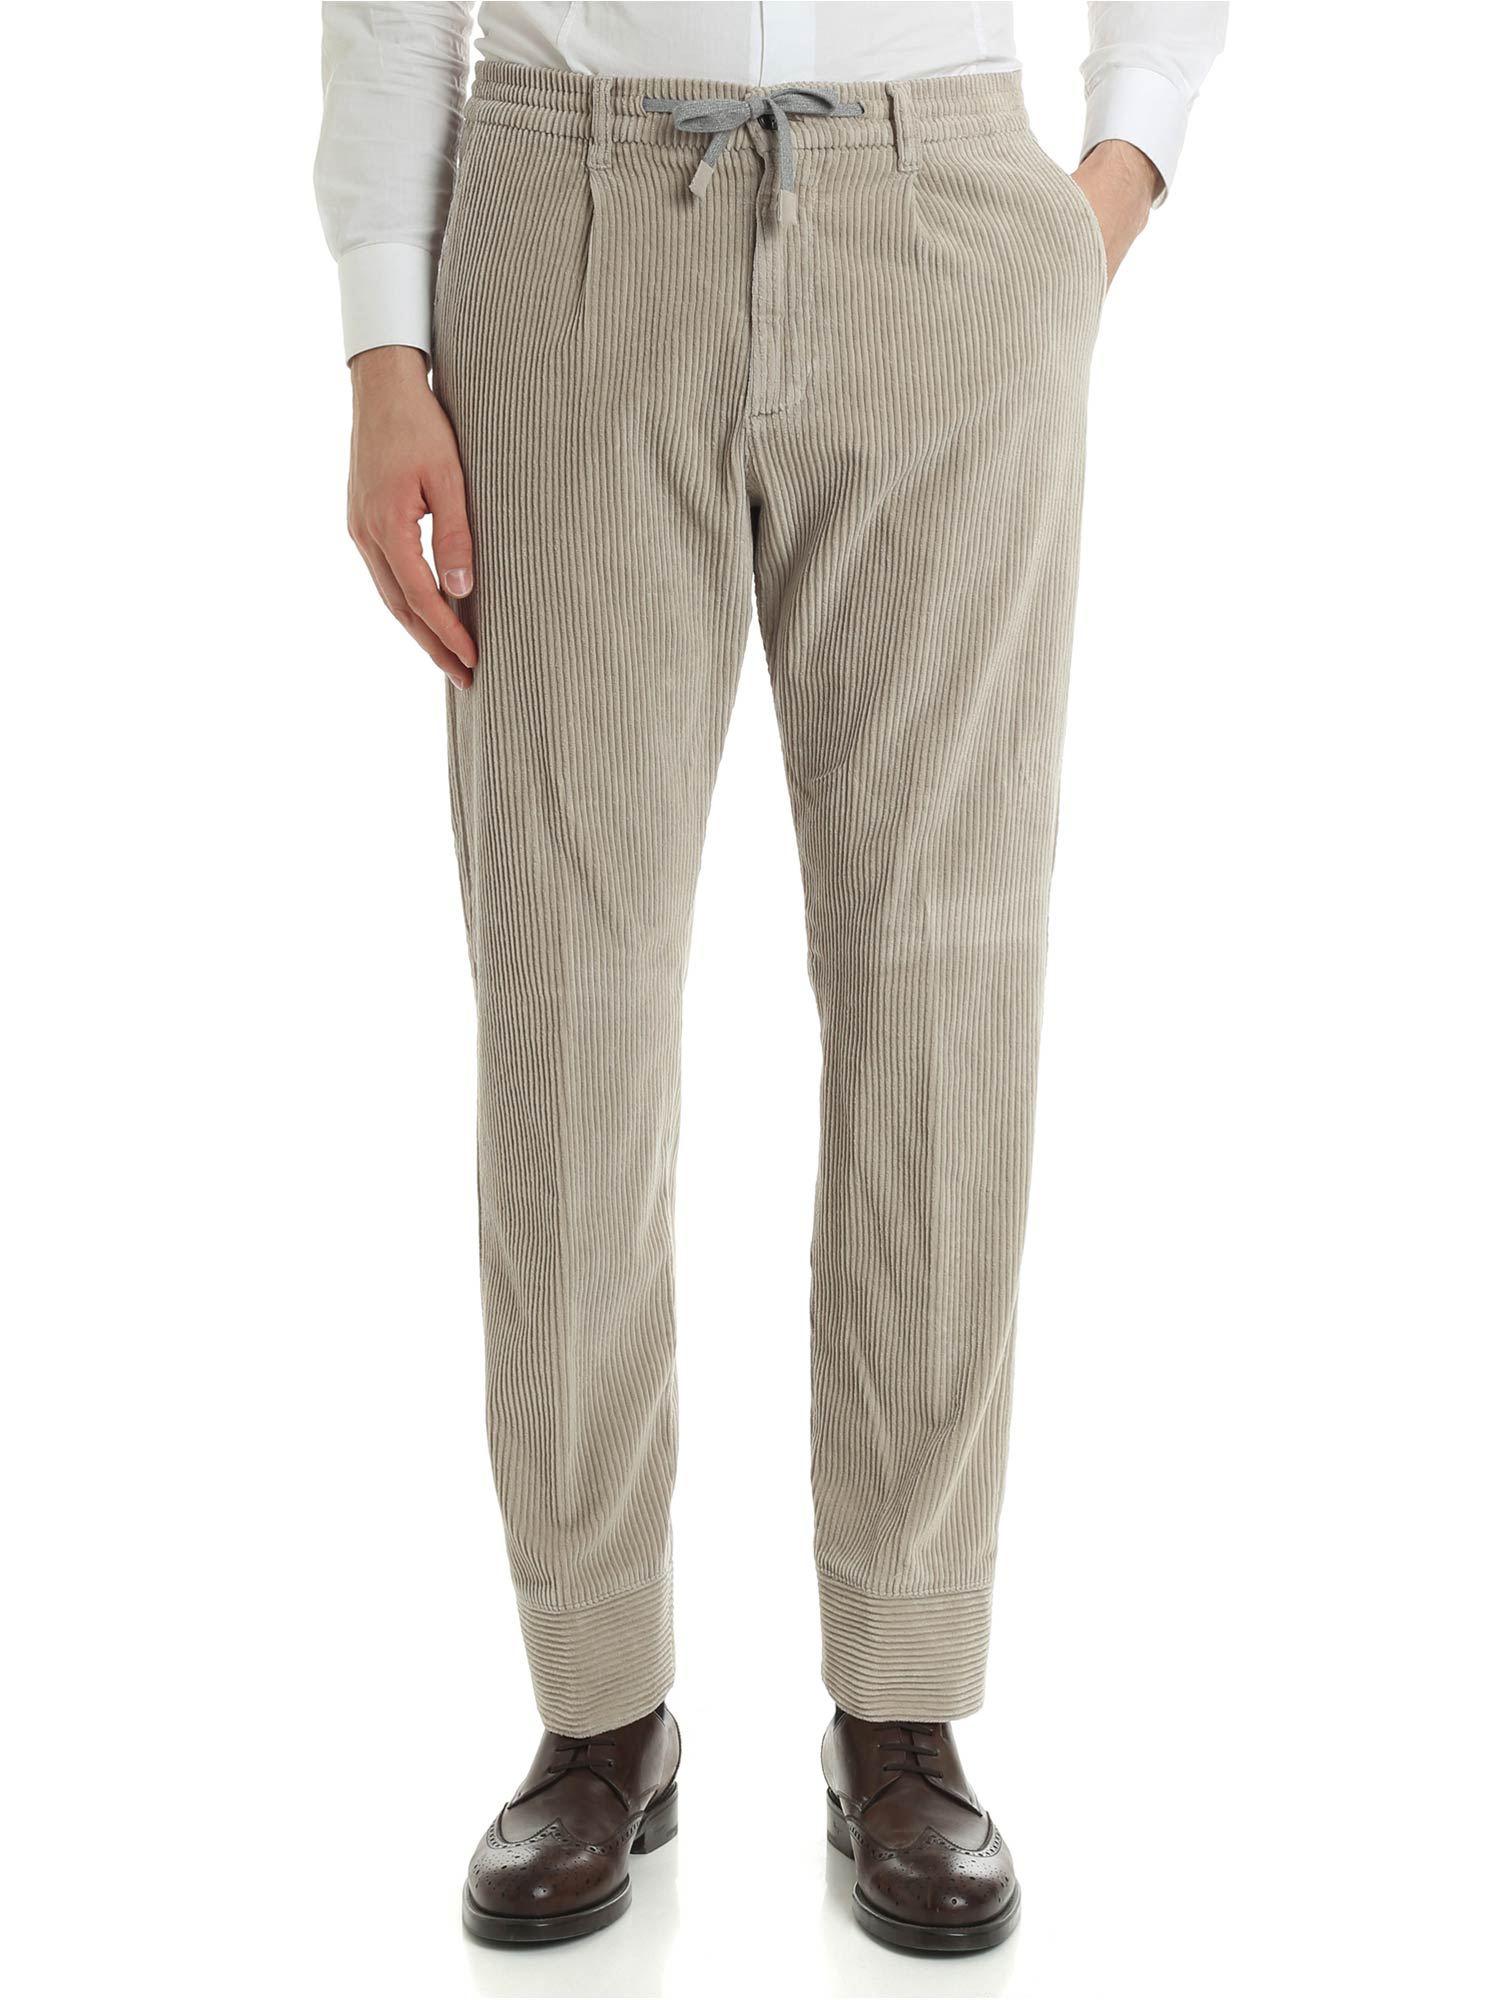 Lyst - Eleventy Sand-colored Corduroy Trousers in Natural for Men